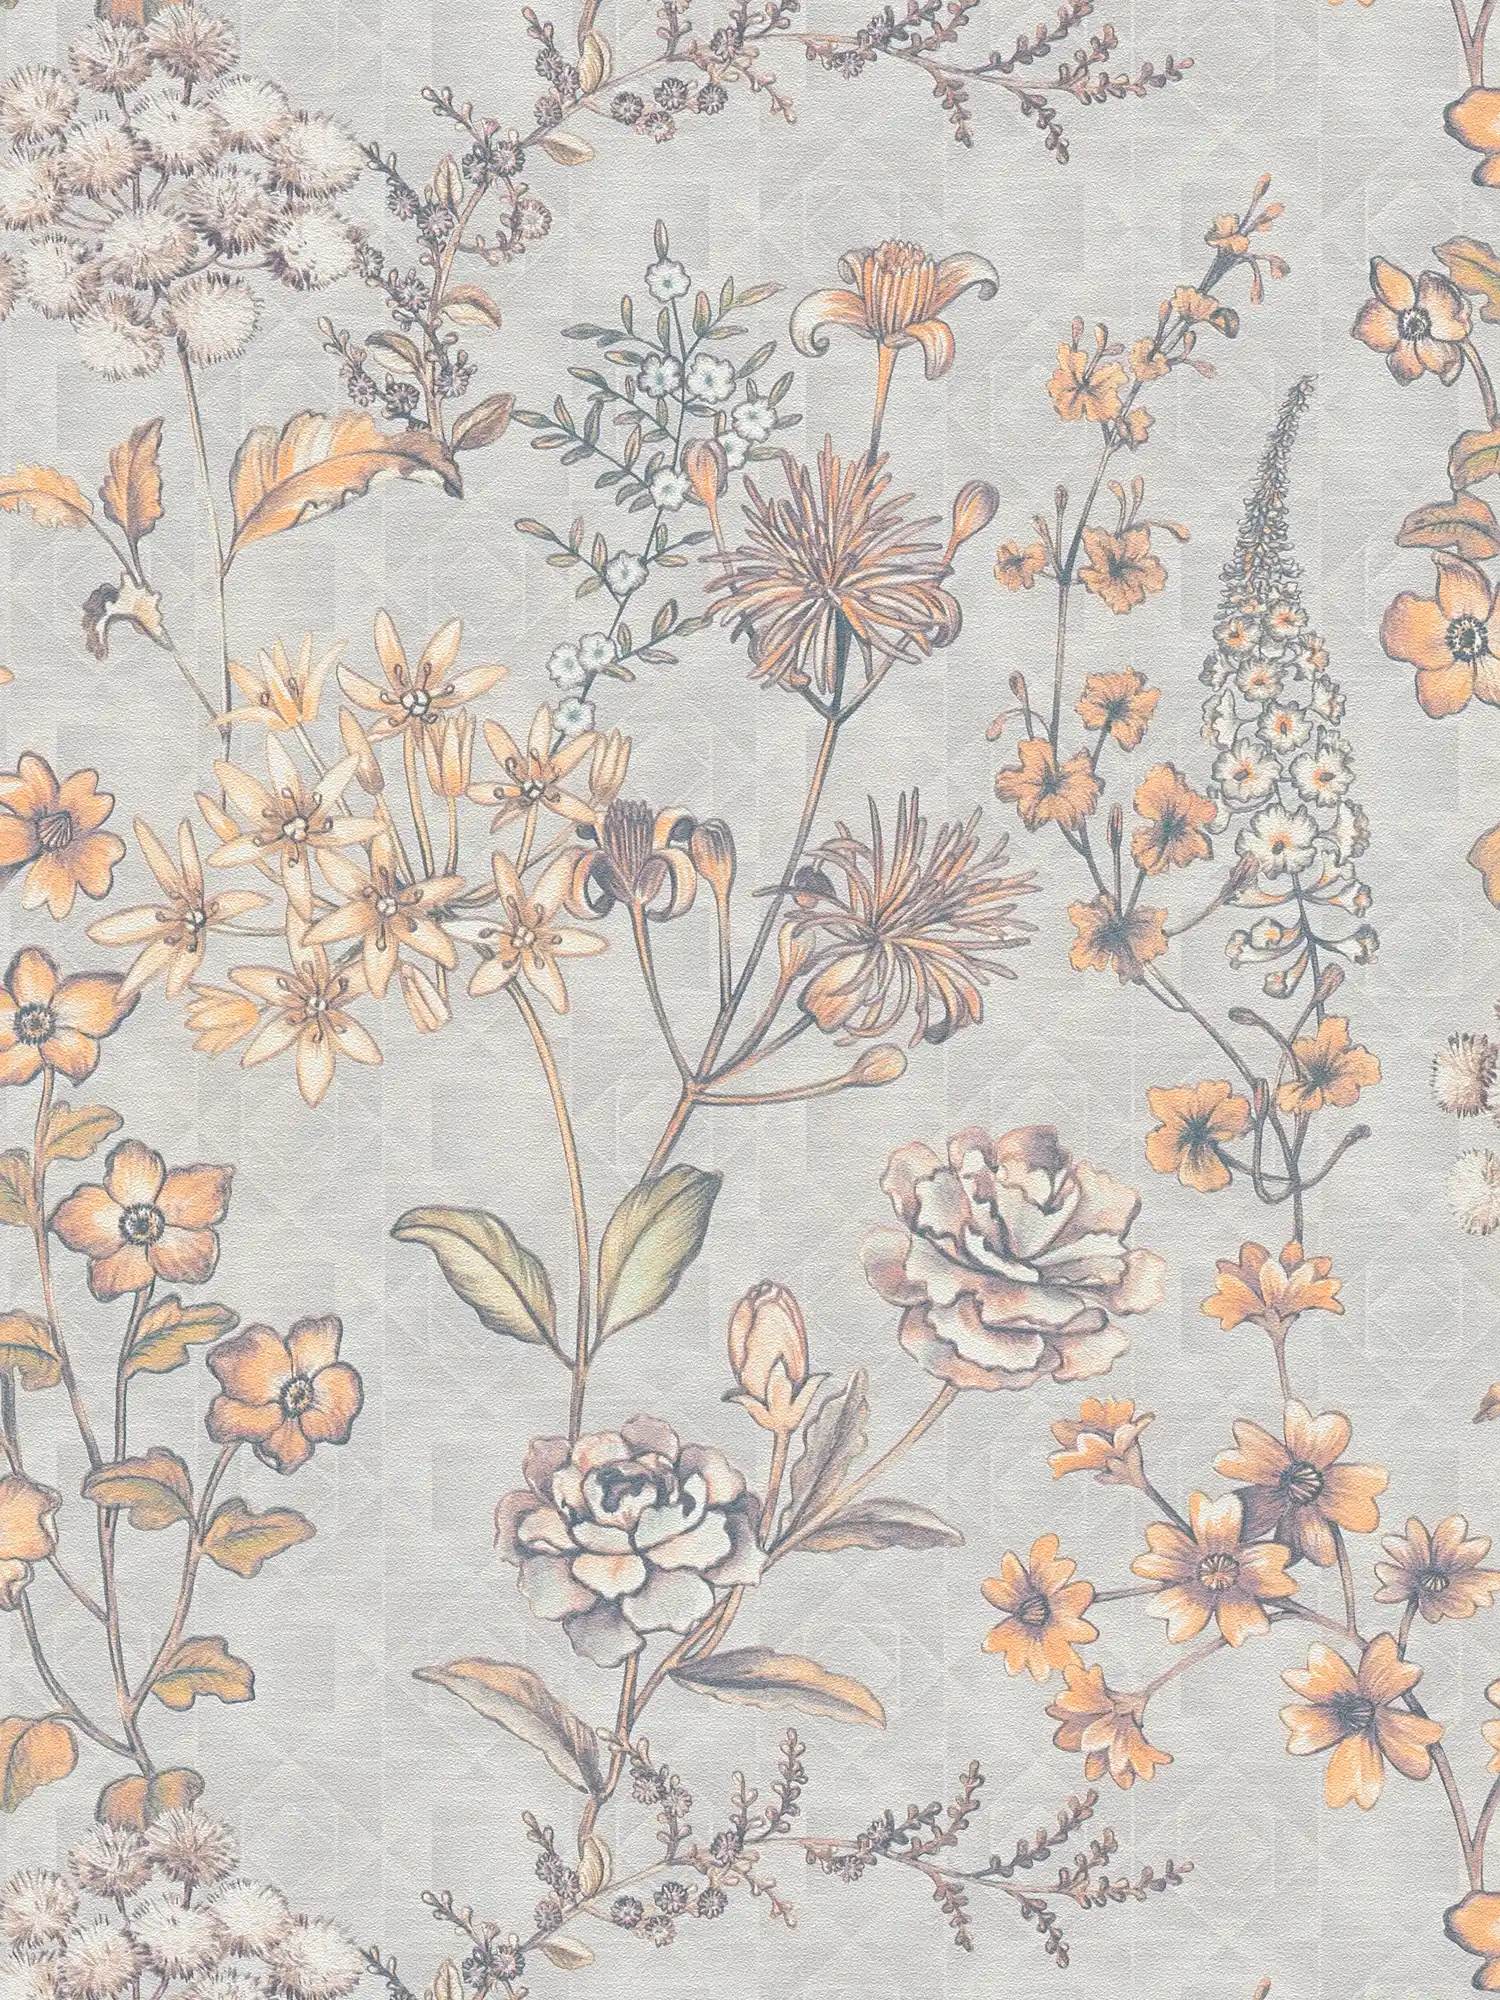 Non-woven wallpaper with floral vintage design - light grey, orange, yellow
